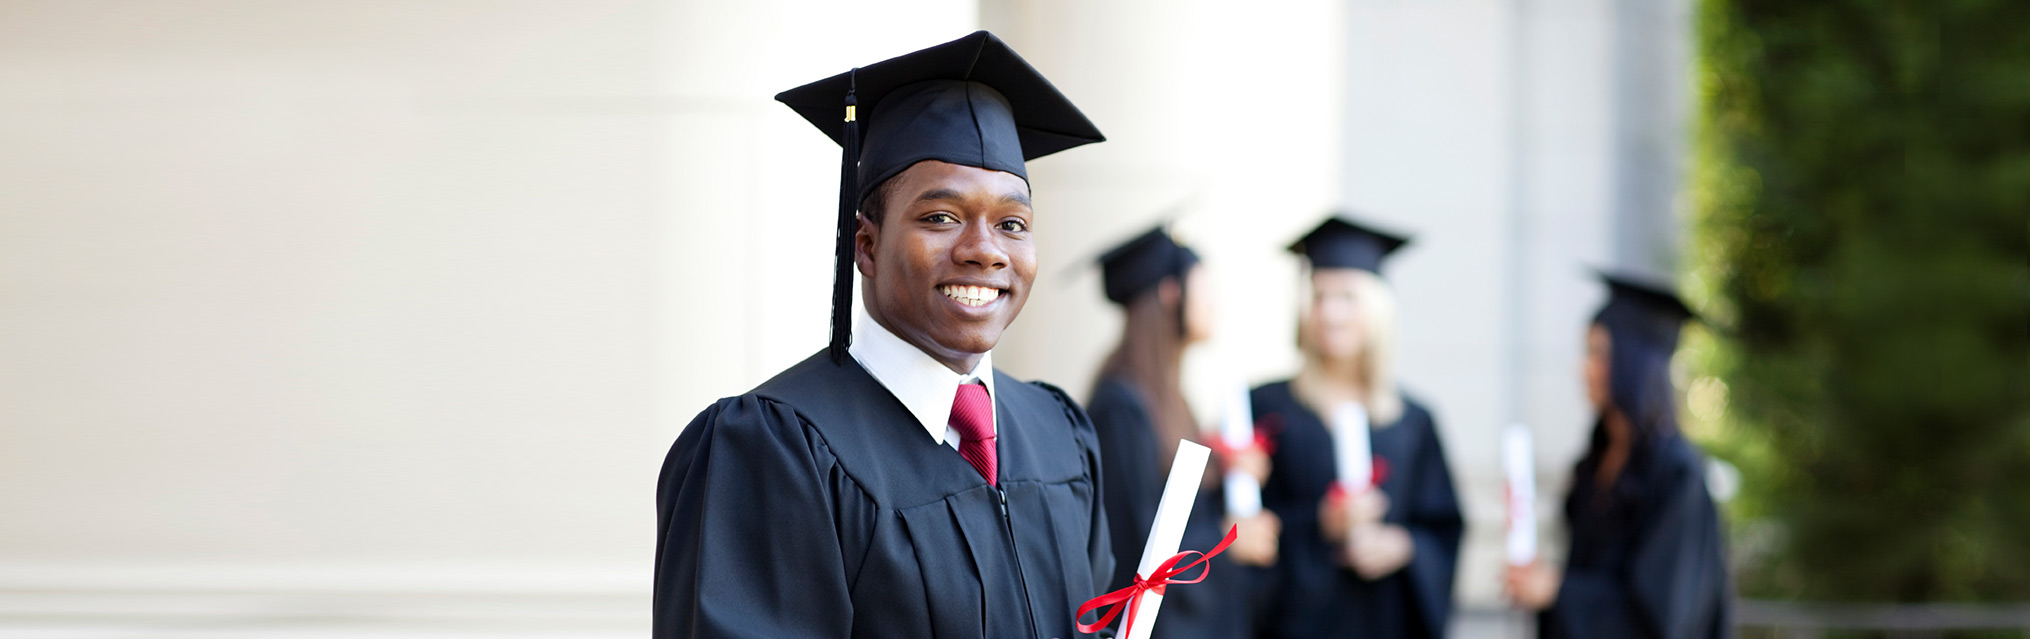 Scholarships and recognitions offered by Reliant
